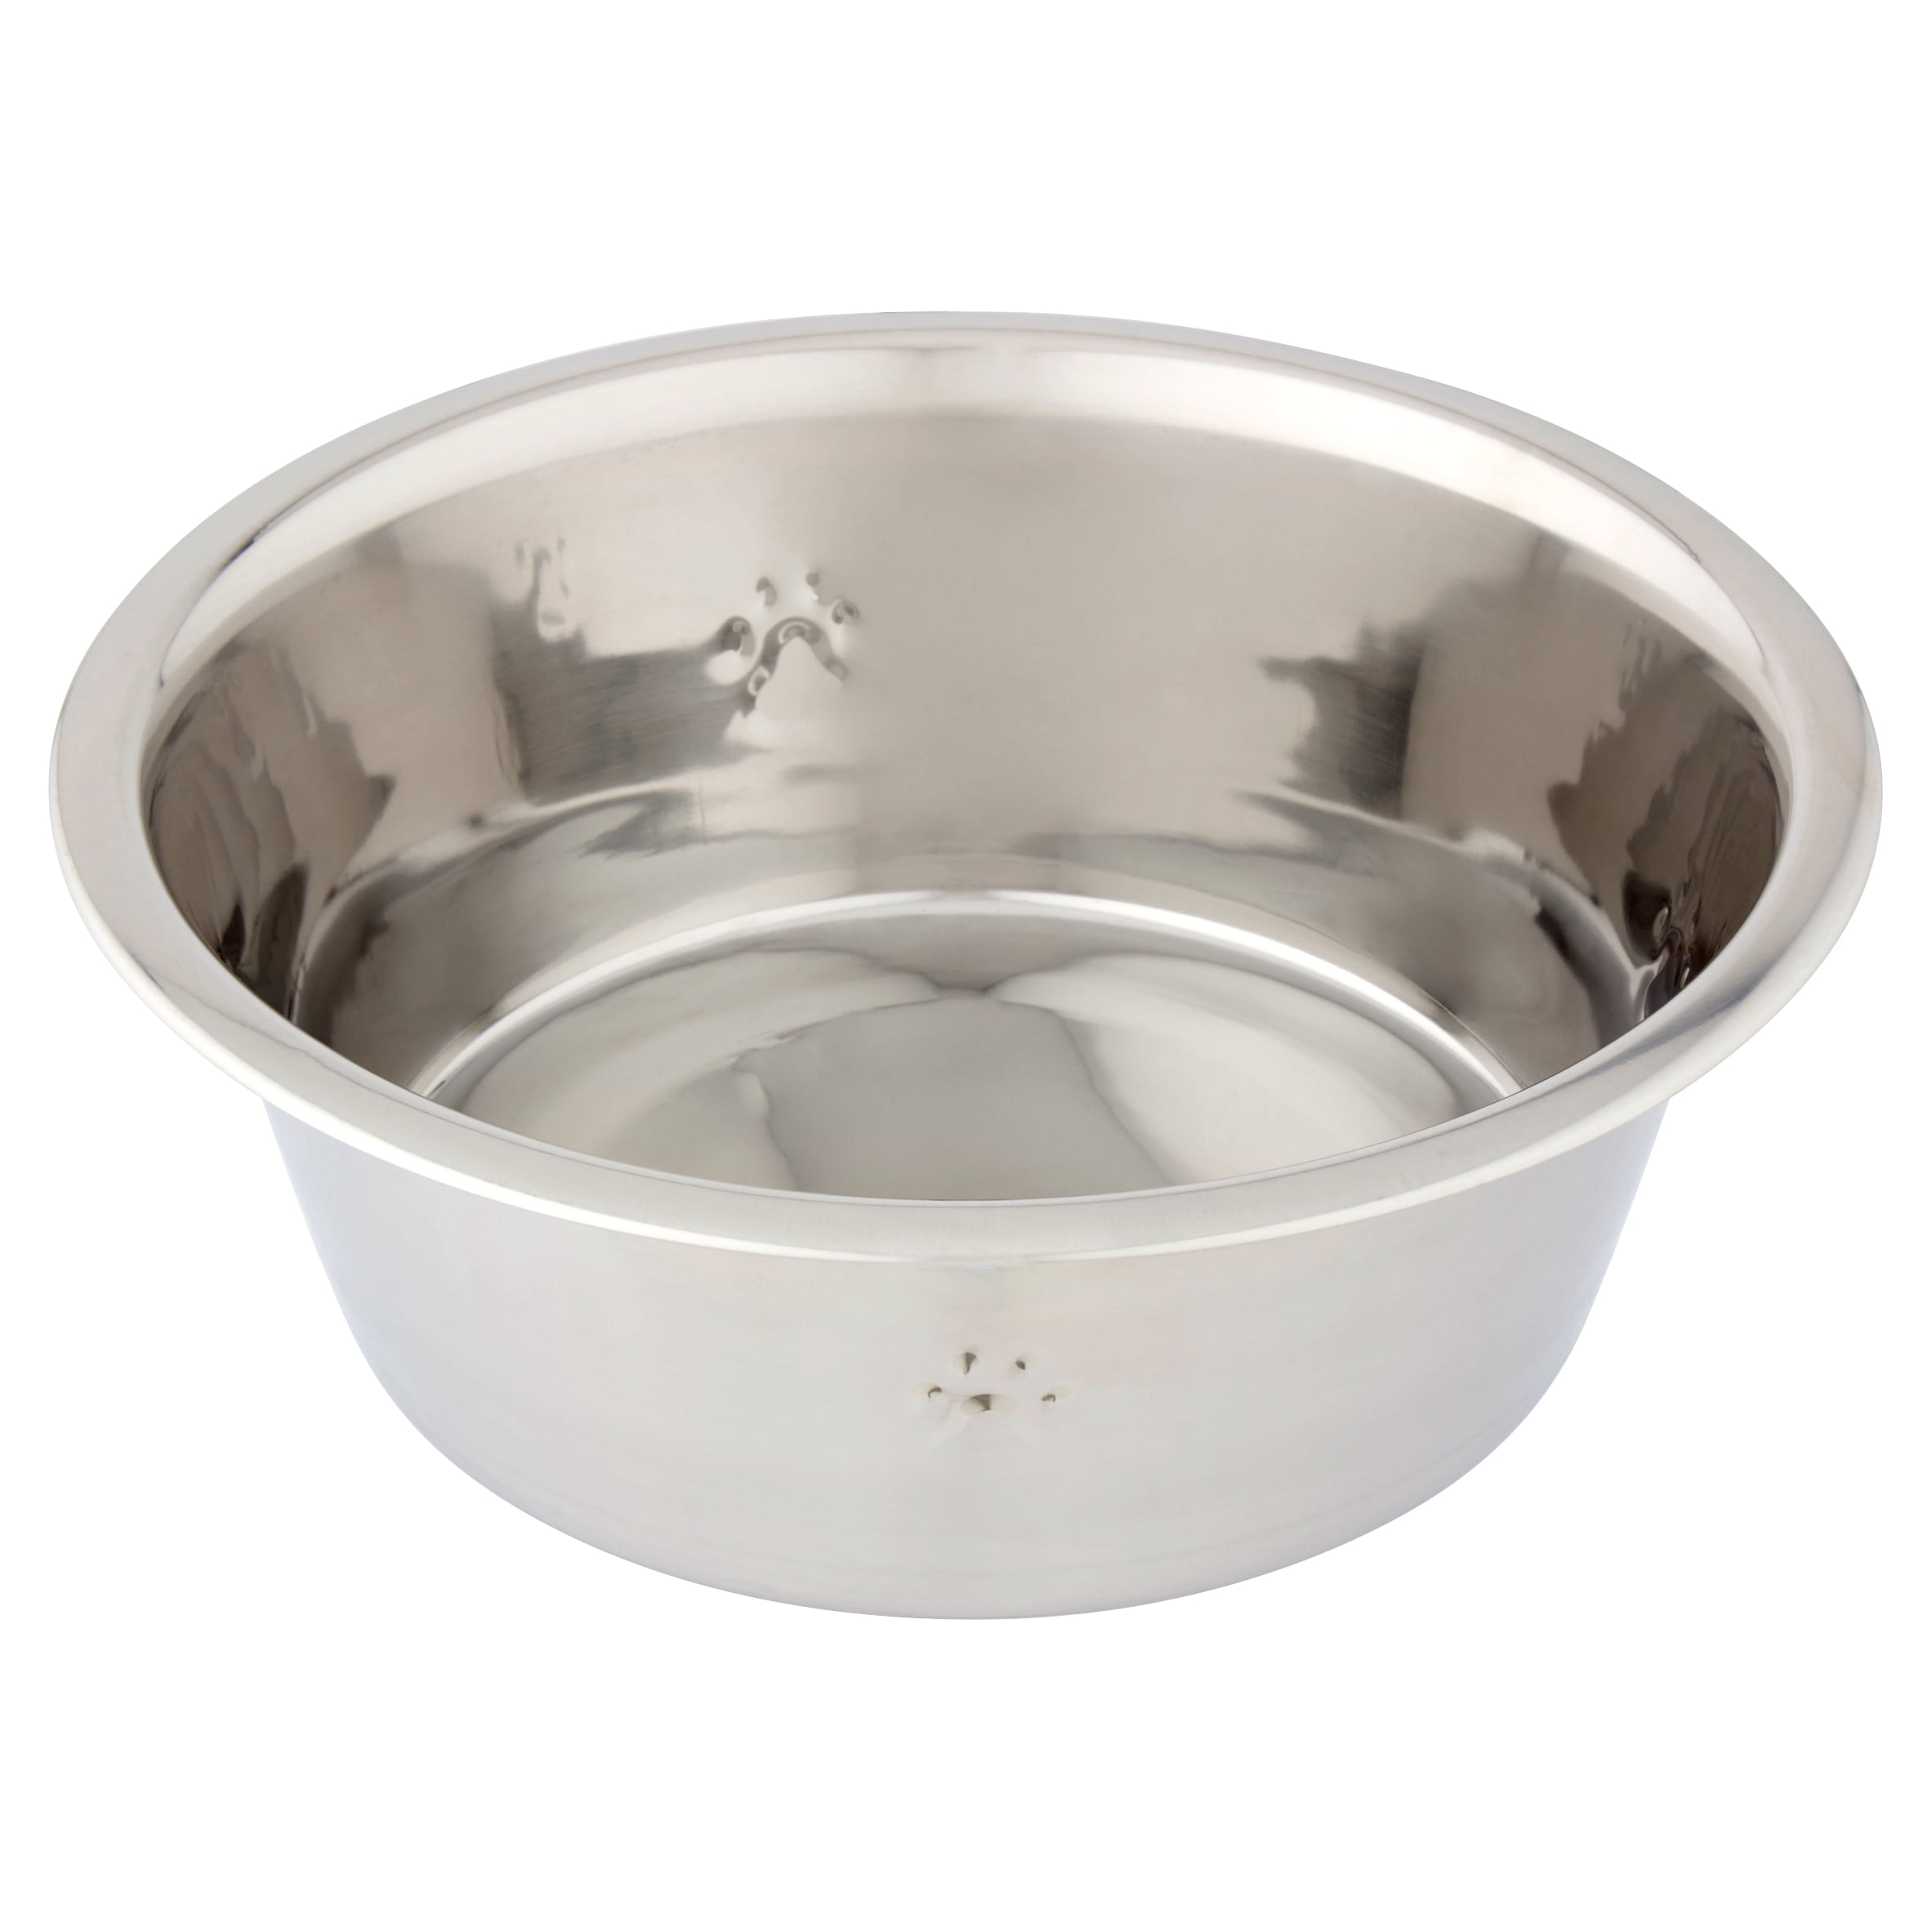 Bwogue Extra Large Dog Water Bowl, 3 Gallons, Stainless Steel, Durable,  High Capacity, Rectangular Structure, Strong Stability, Easy to Clean